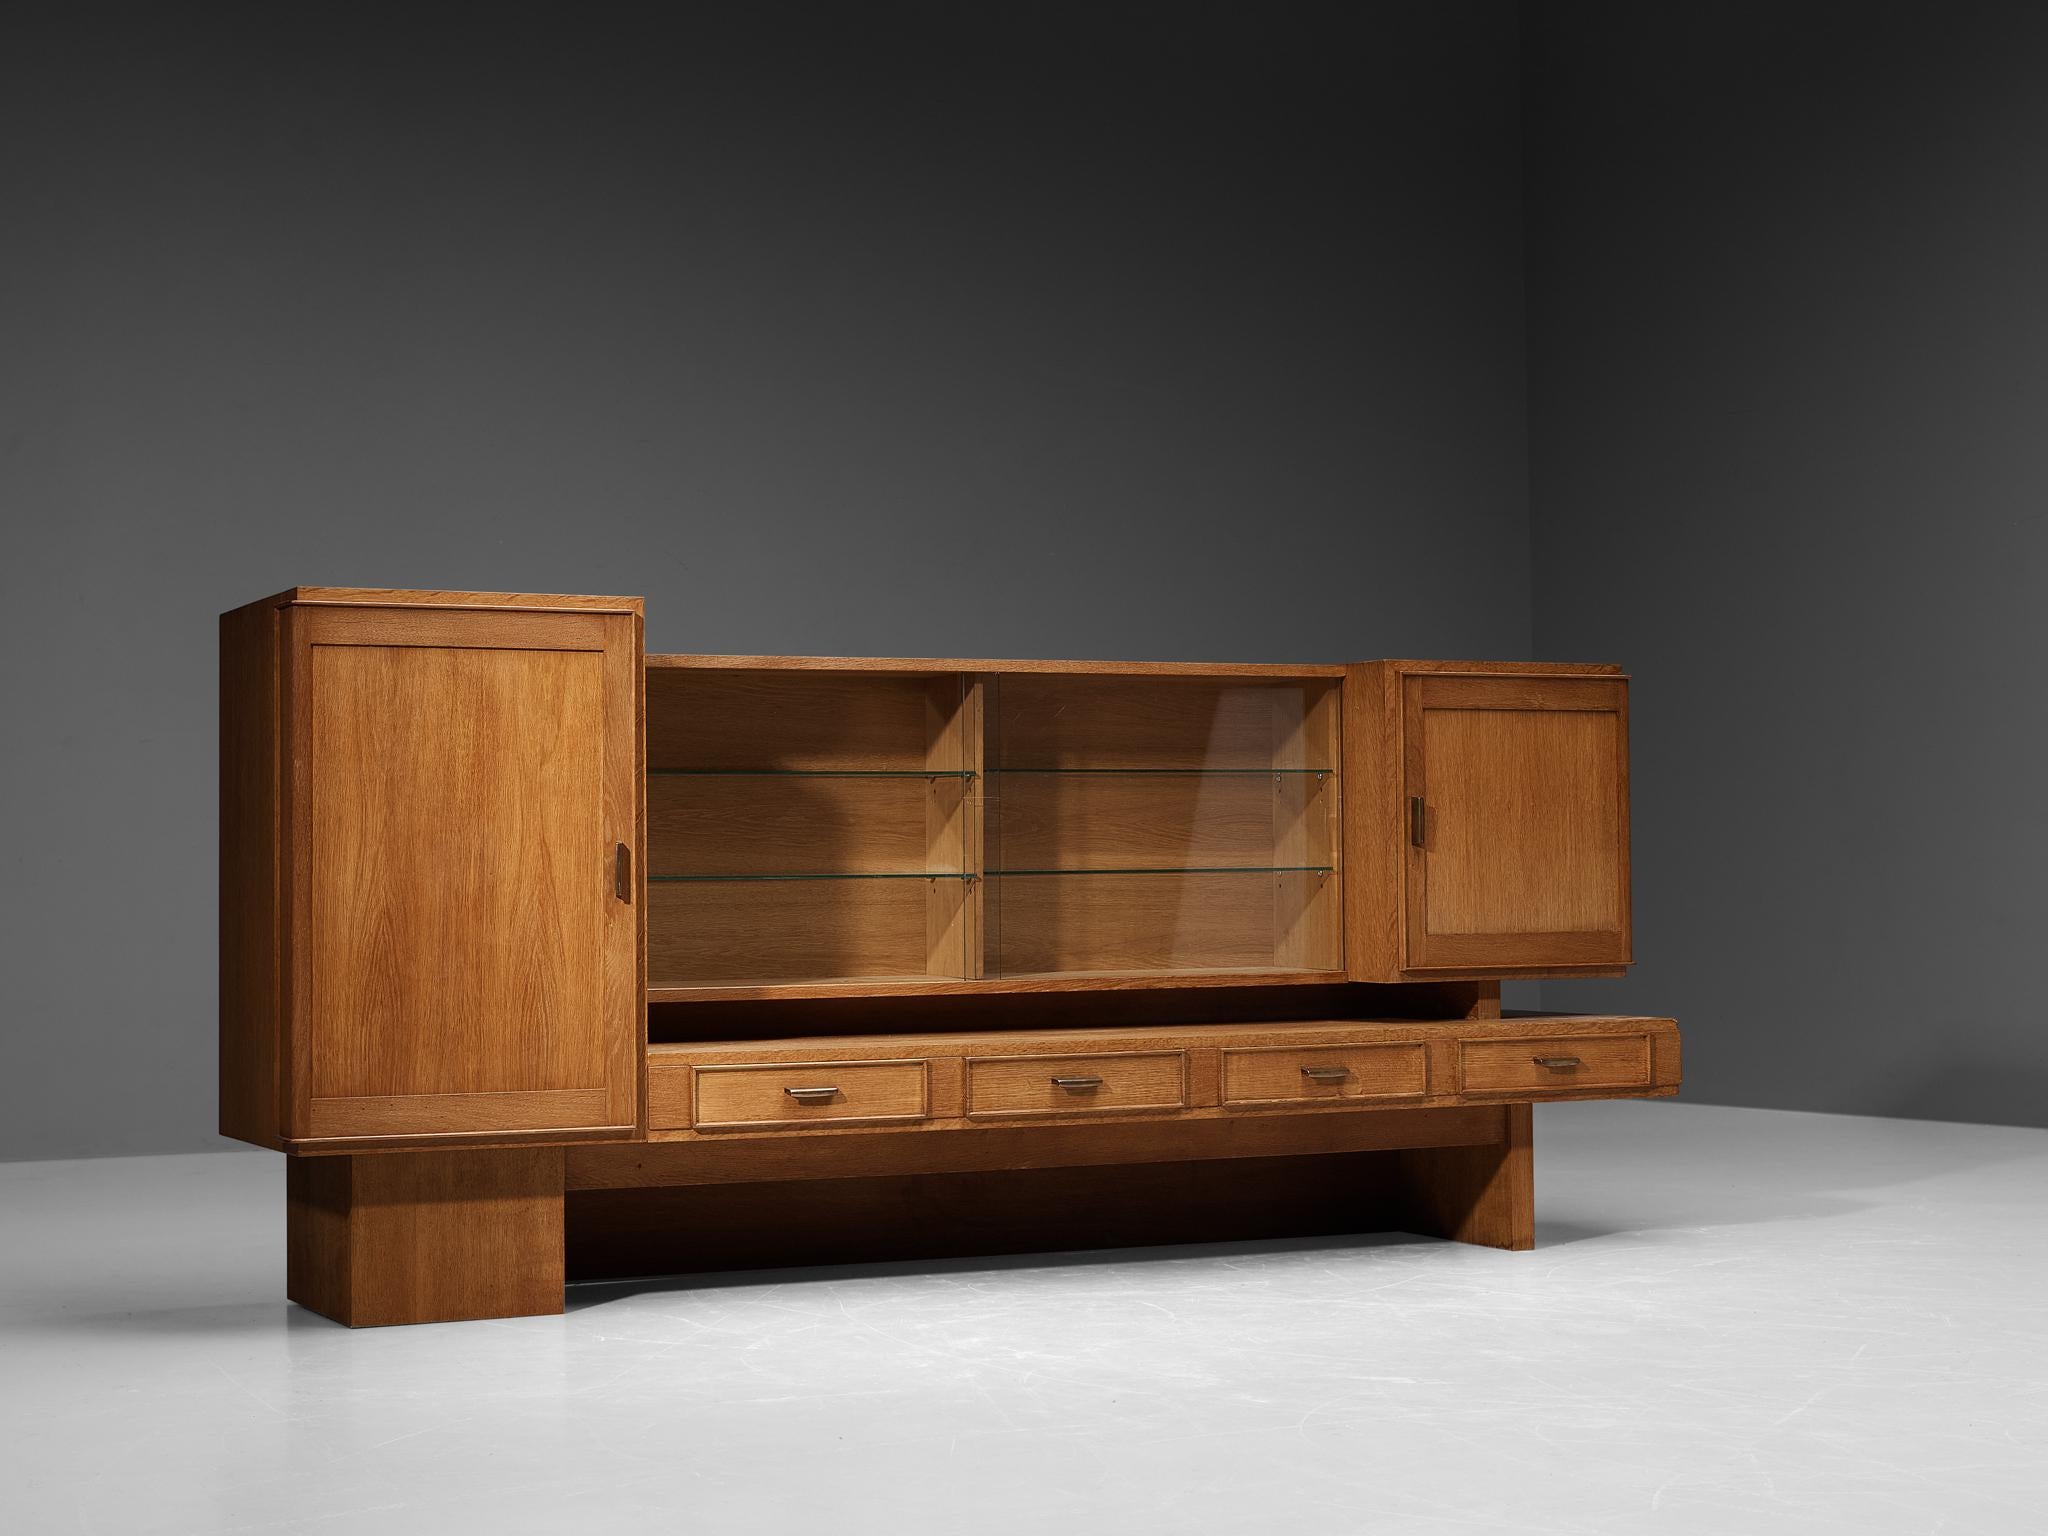 Maurice Pré, cabinet, oak, brass, glass, France, 1950s

This exquisite highboard in solid oak is designed by the French designer Maurice Pré (1908-1988) in the 1950s. It features a variety of different cabinets; two closed cabinets on both ends